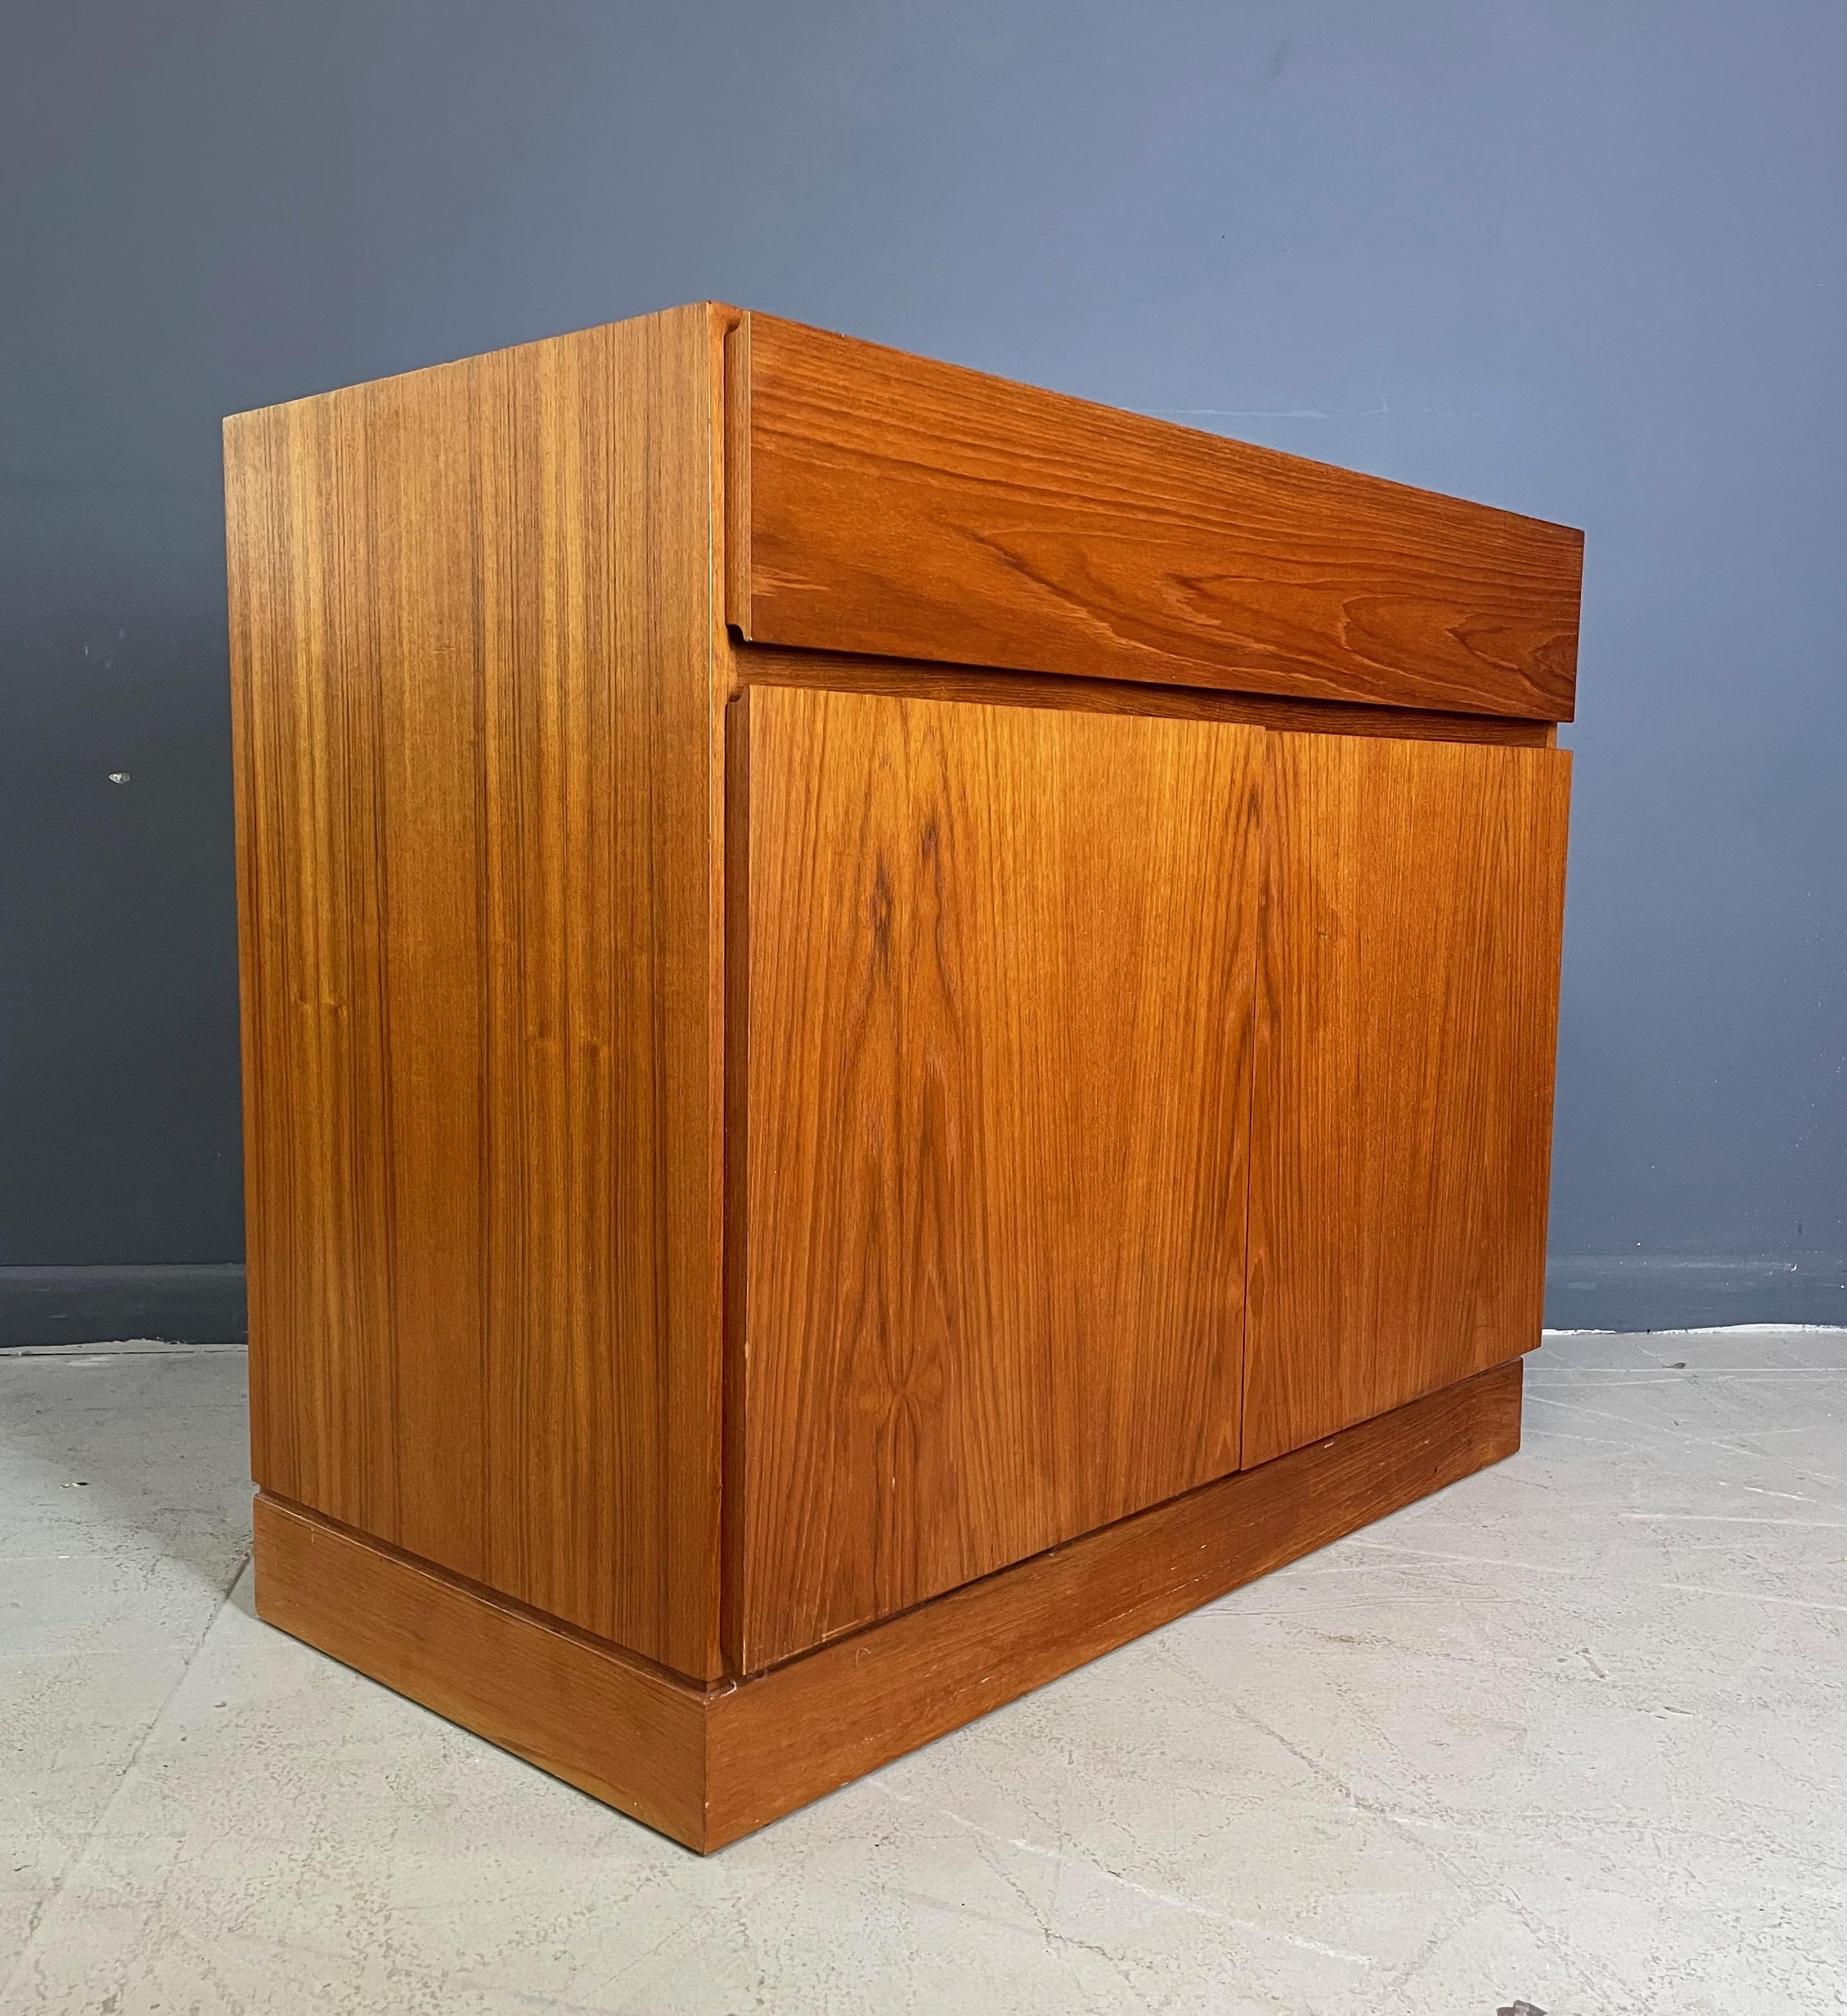 Handsome chest designed by Arne Wahl Iverson in teak by Vinde Mobelfabrik. This unusual chest has a large drawer on top with two doors underneath that open to reveal four sliding drawers on the left and a shelf on the right.